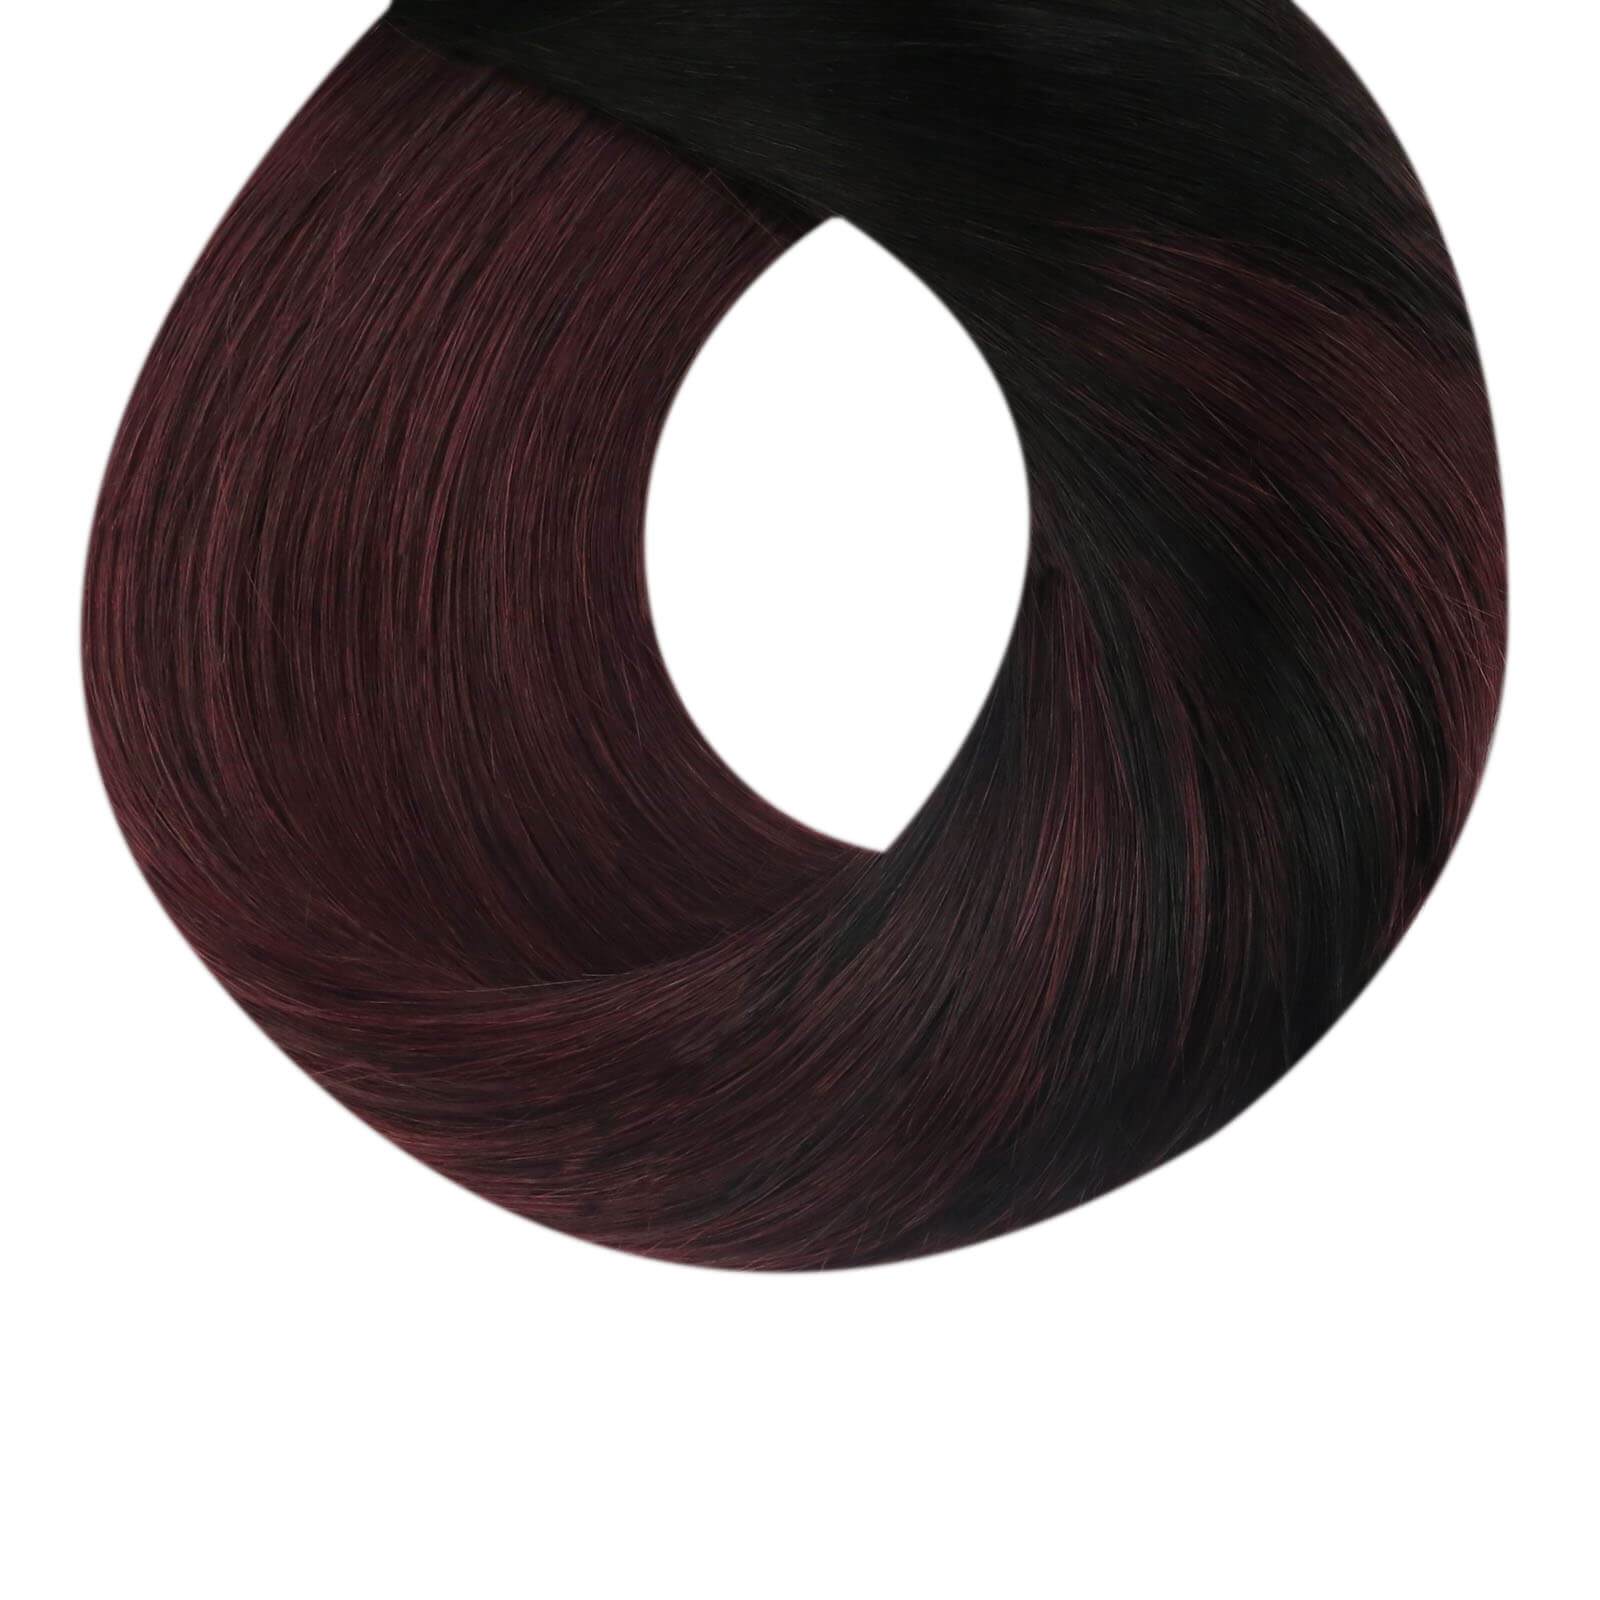 Clip in Hair Extensions 14inch Human Hair Extensions Clip in Hair